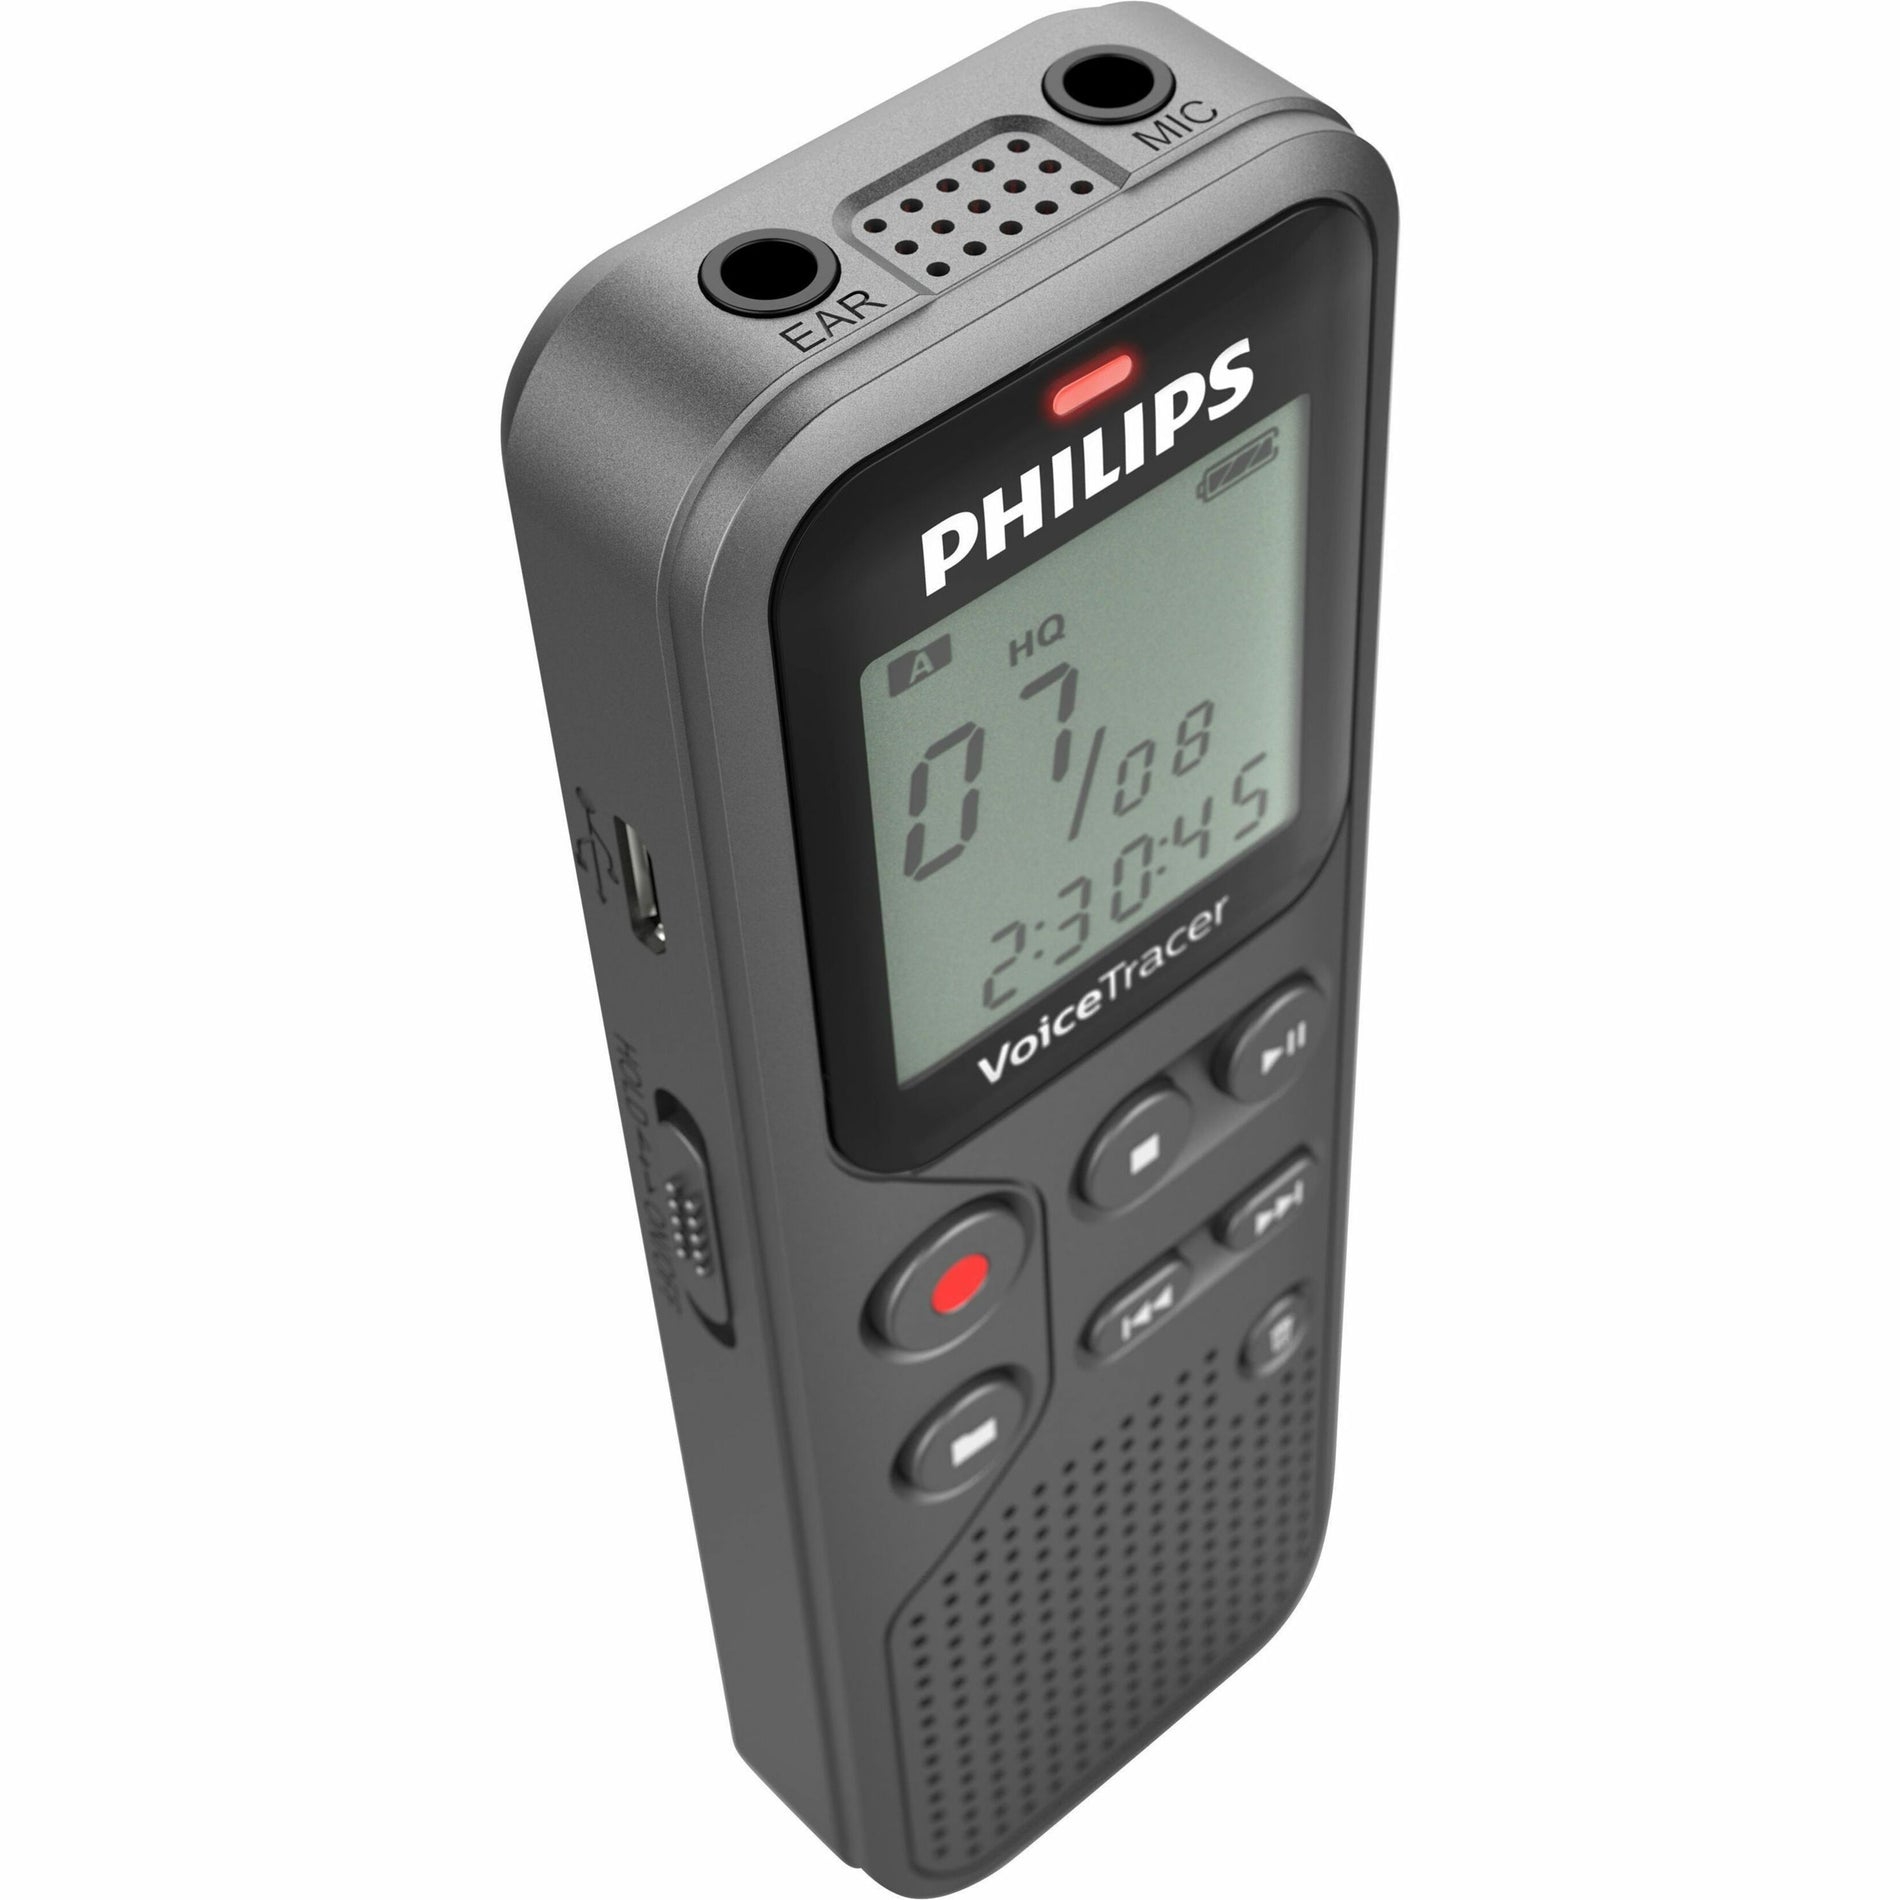 Philips DVT1120 VoiceTracer 8GB Digital Voice Recorder, 46 Hour Recording, LCD Screen